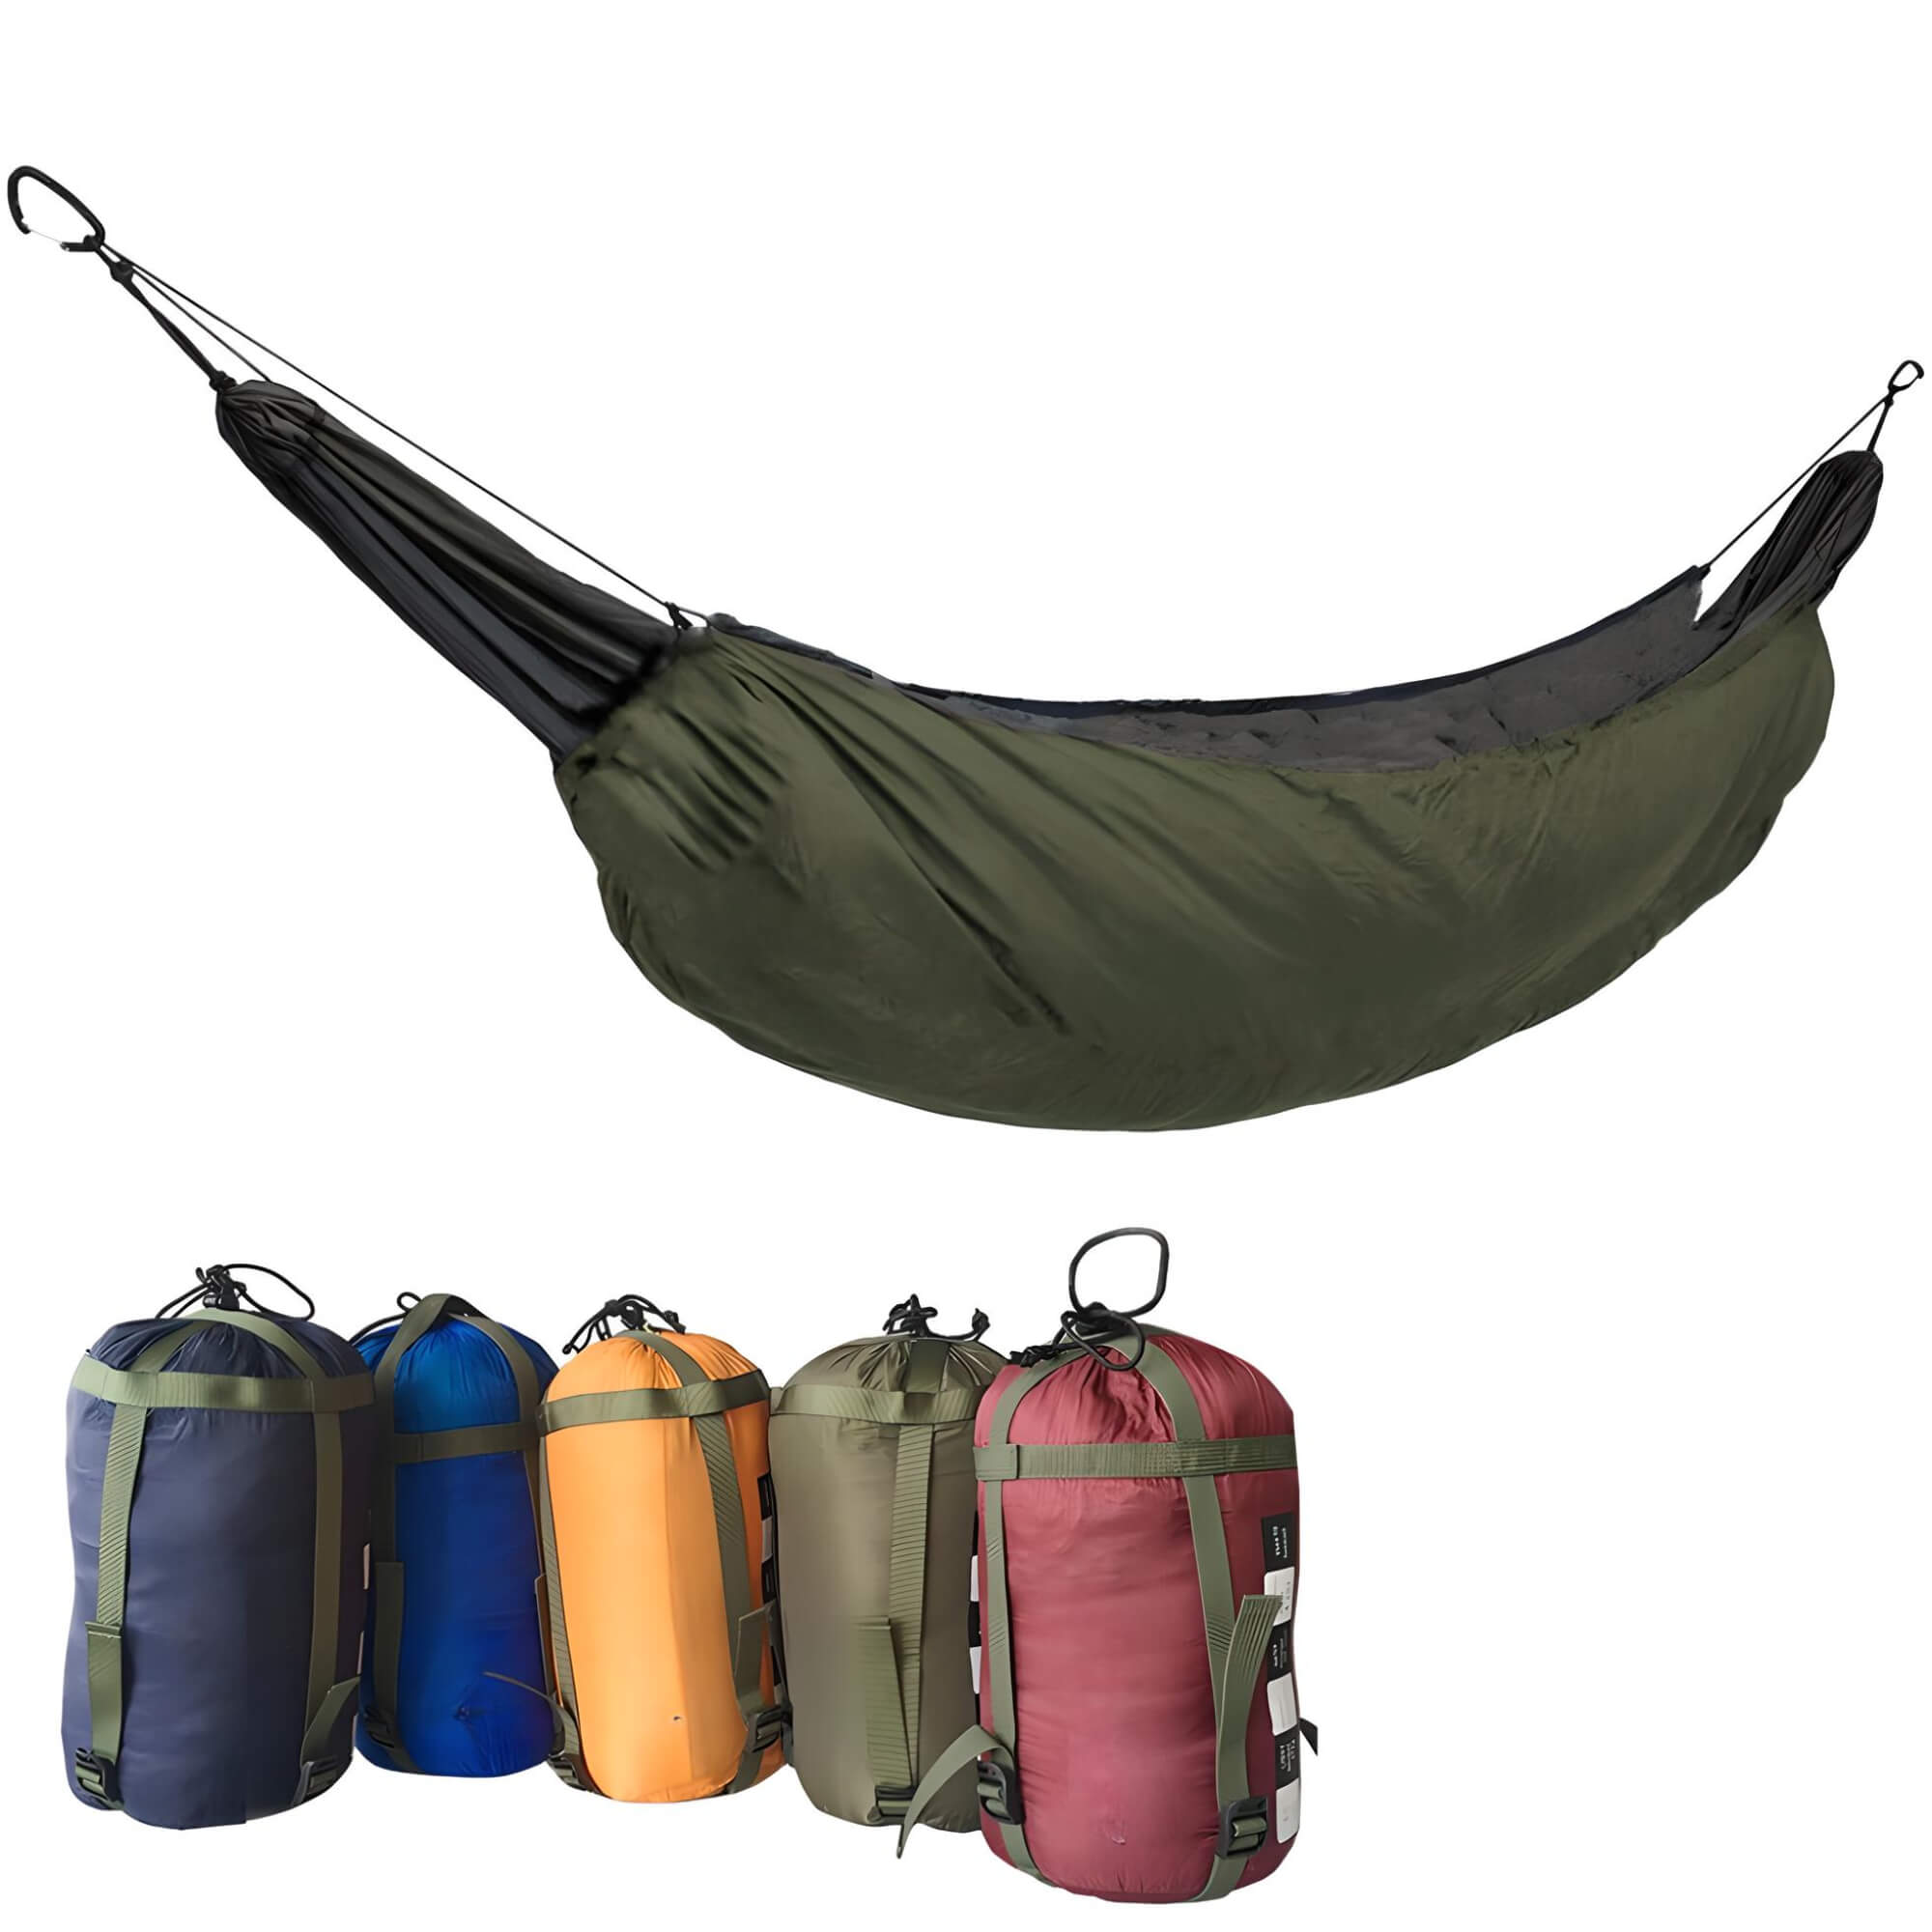 winter-camping-hammock-bag-with-different-colors